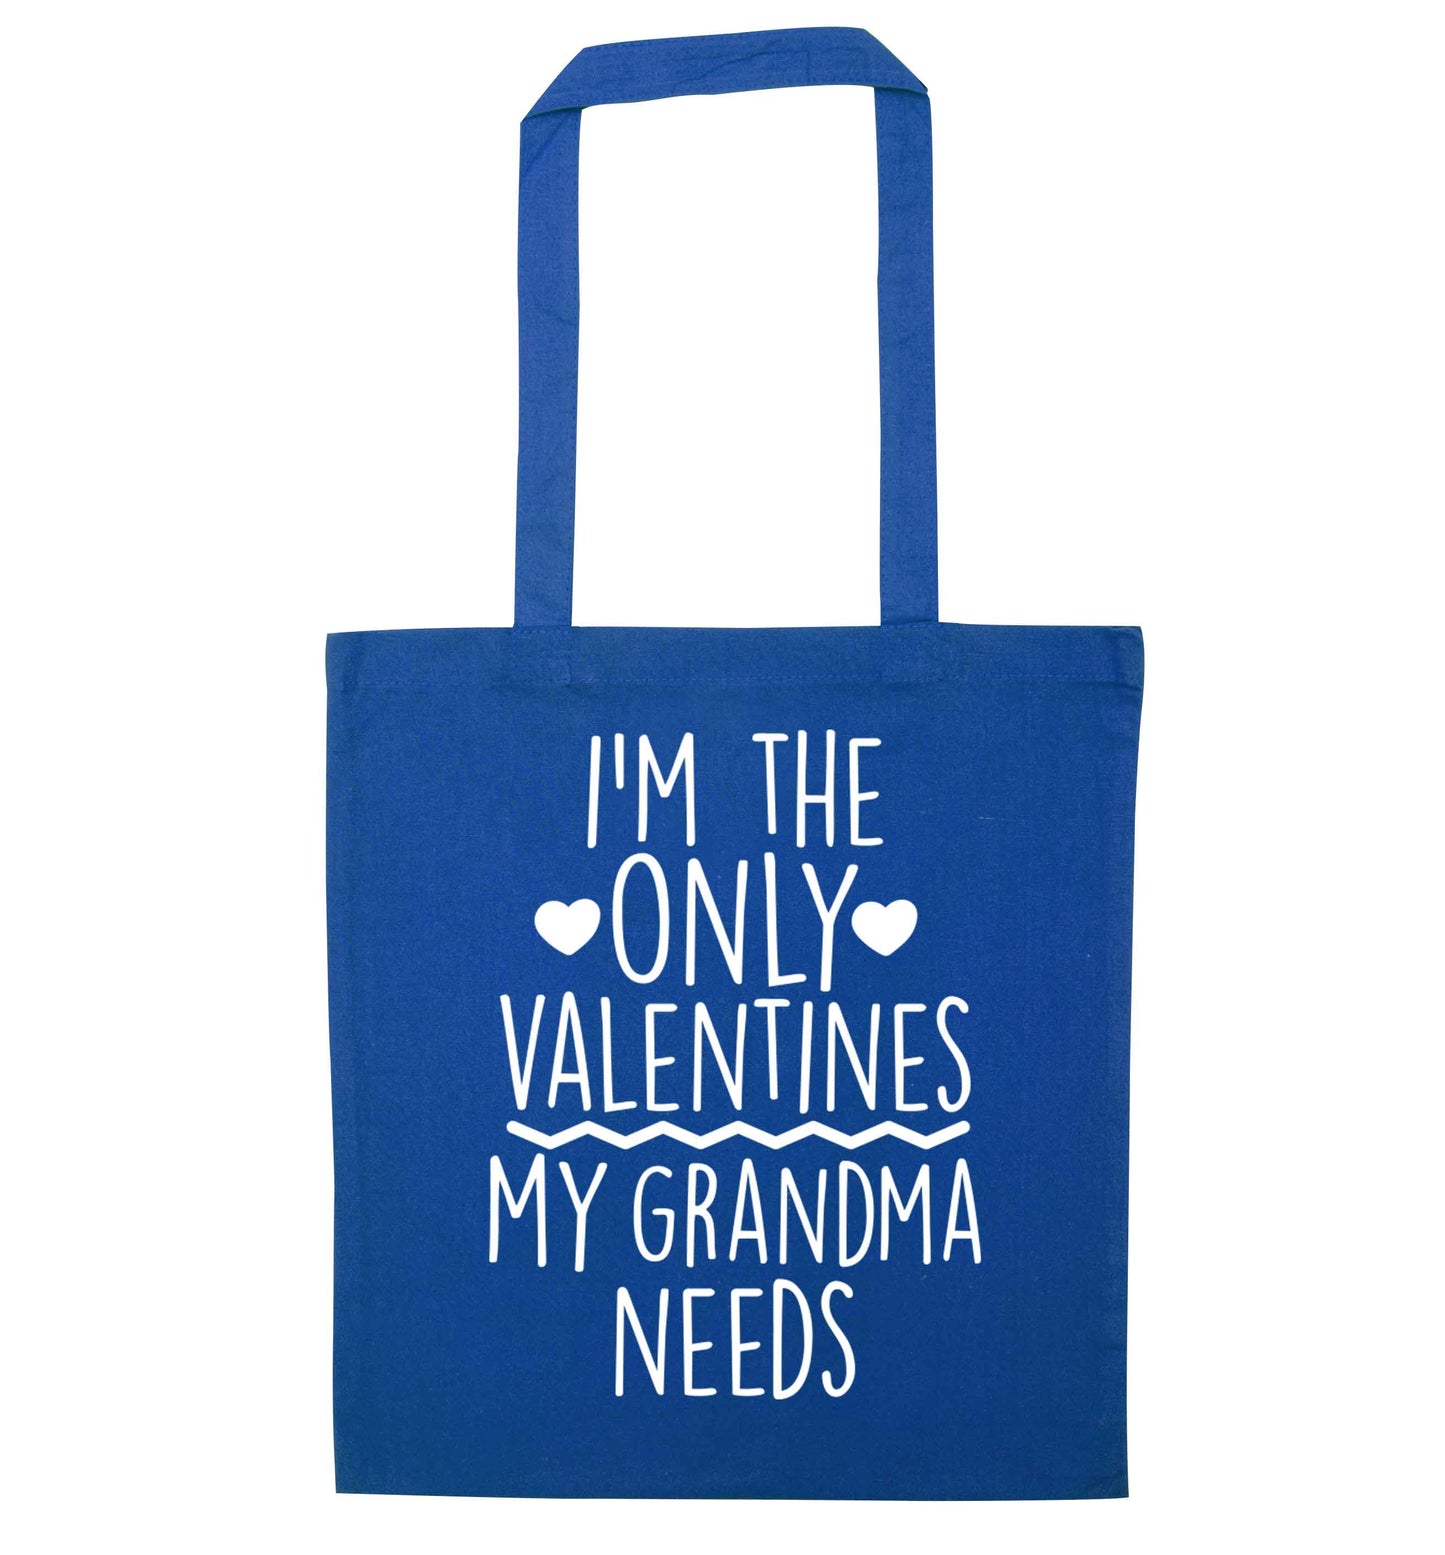 I'm the only valentines my grandma needs blue tote bag